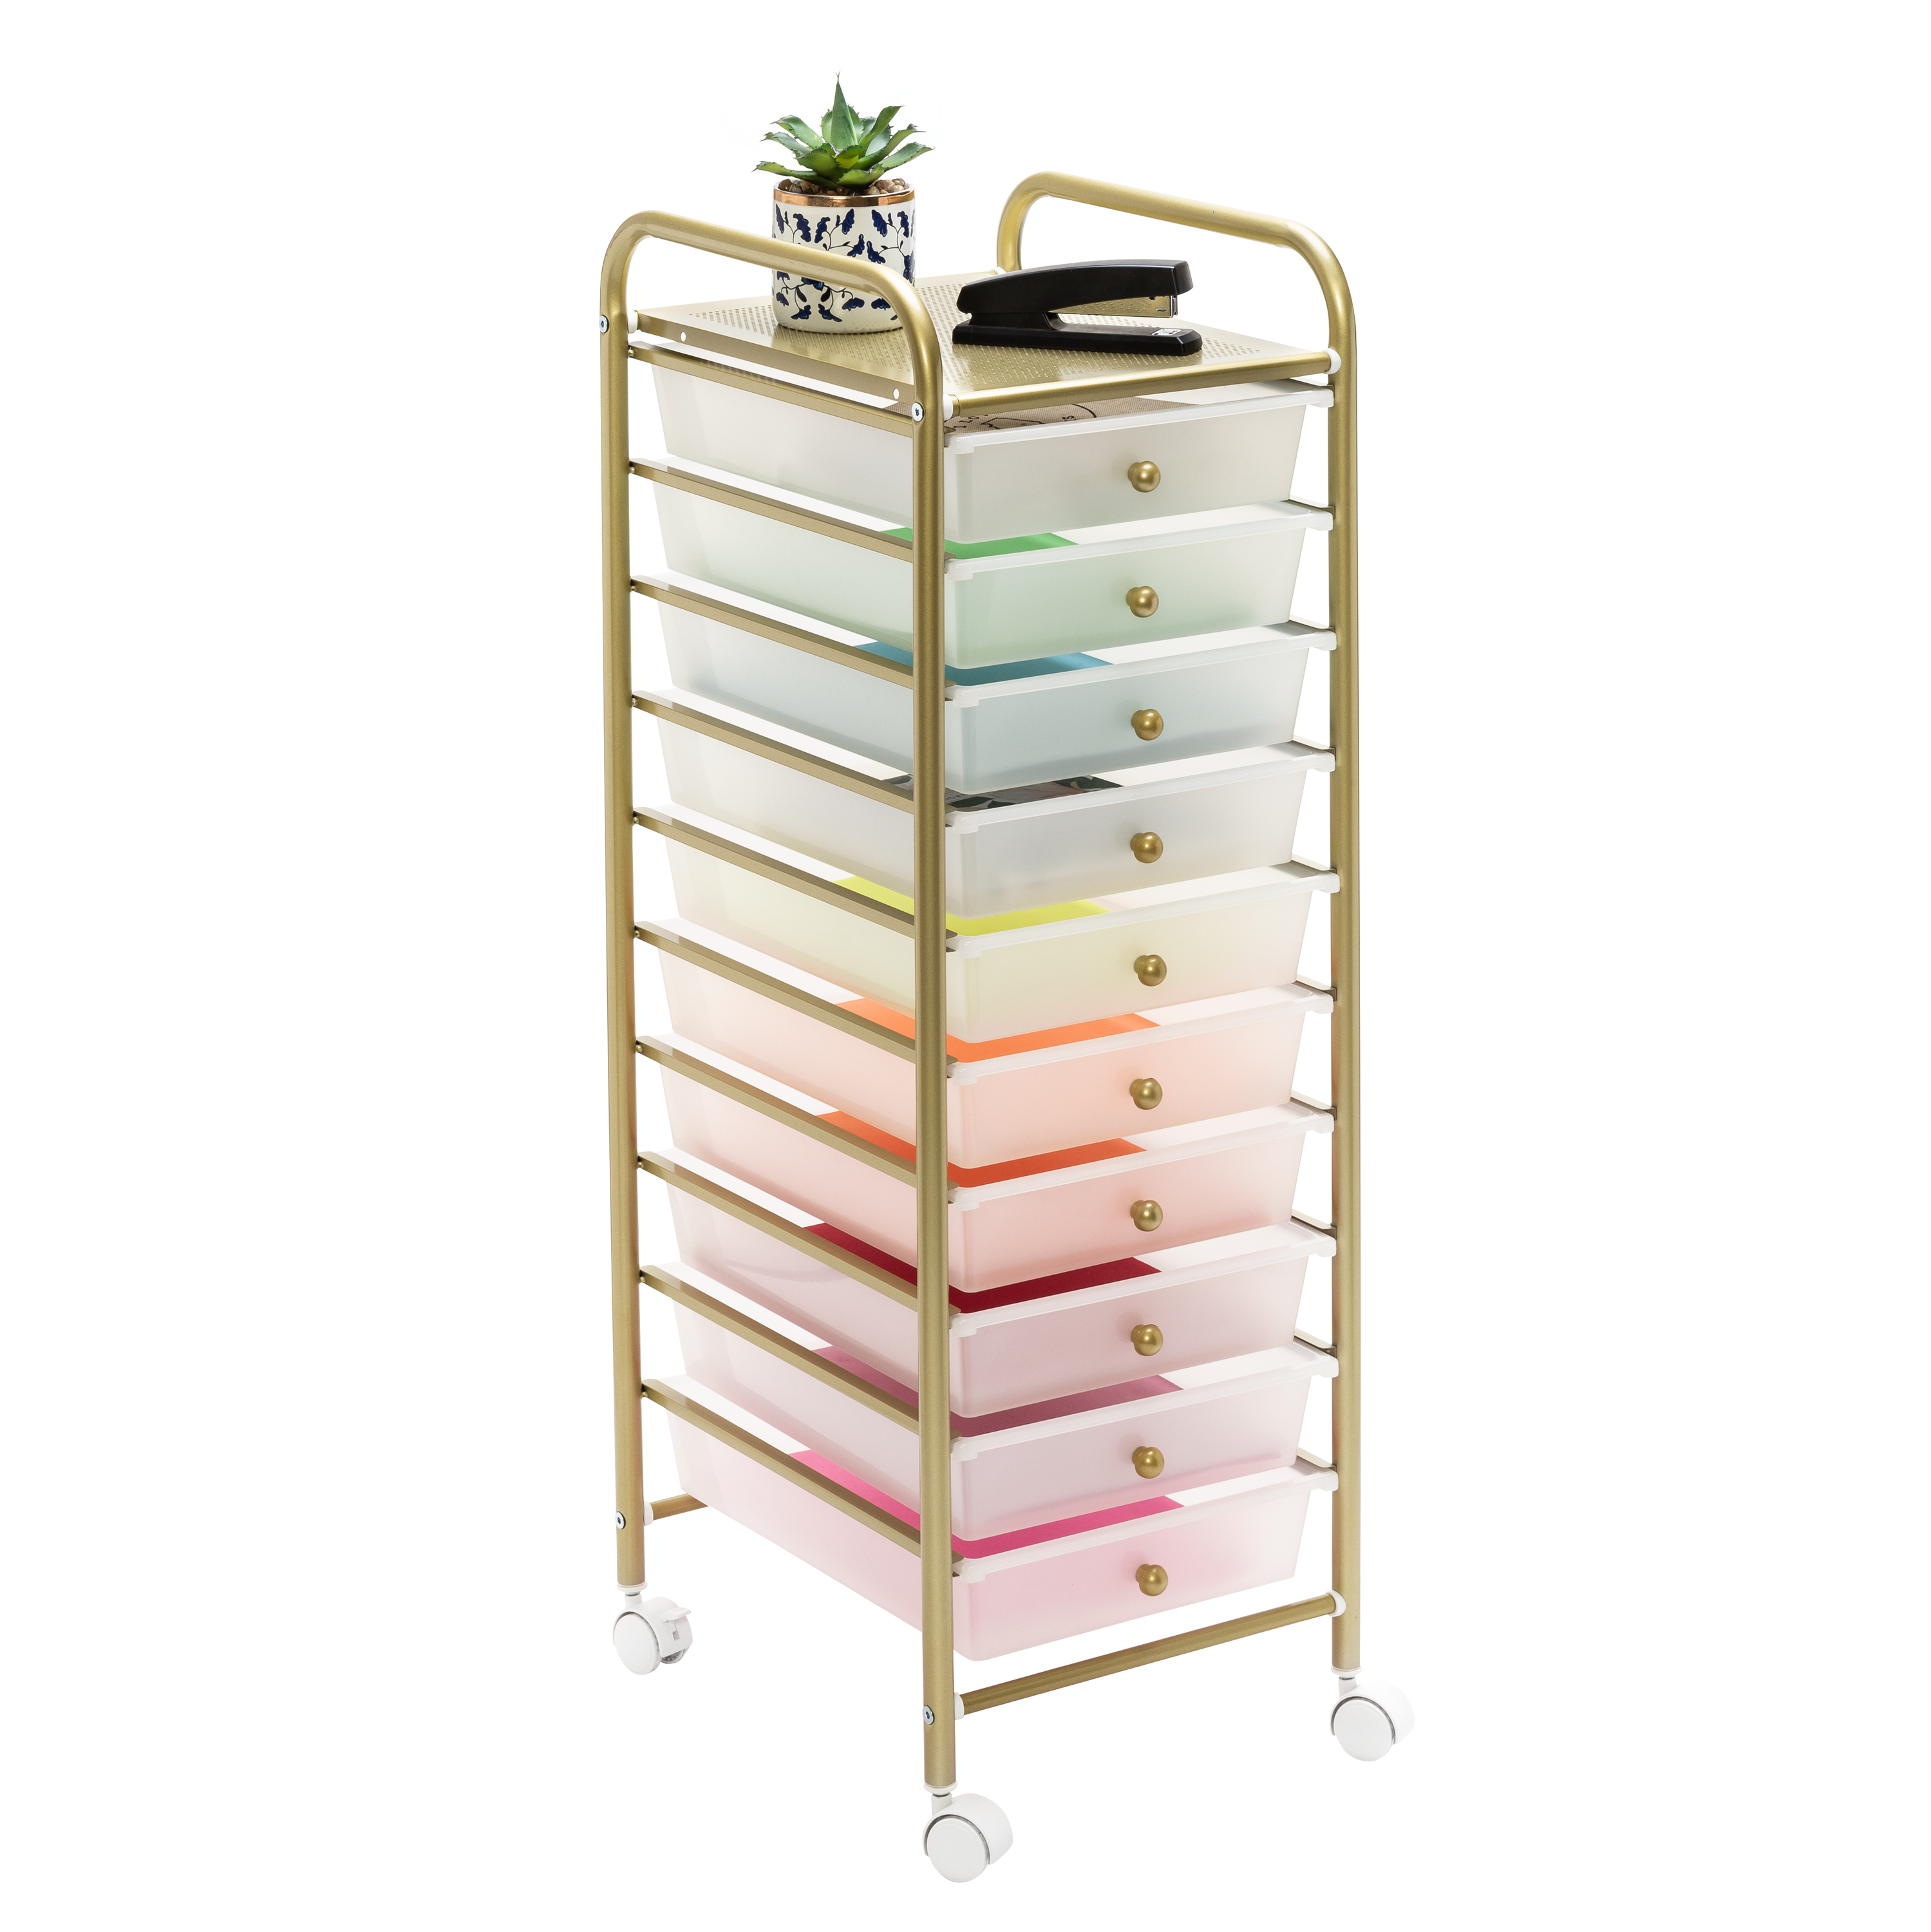 Honey-Can-Do Plastic and Steel 10-Drawer Rolling Storage Cart with 1 Shelf, Clear/Gold - image 1 of 10